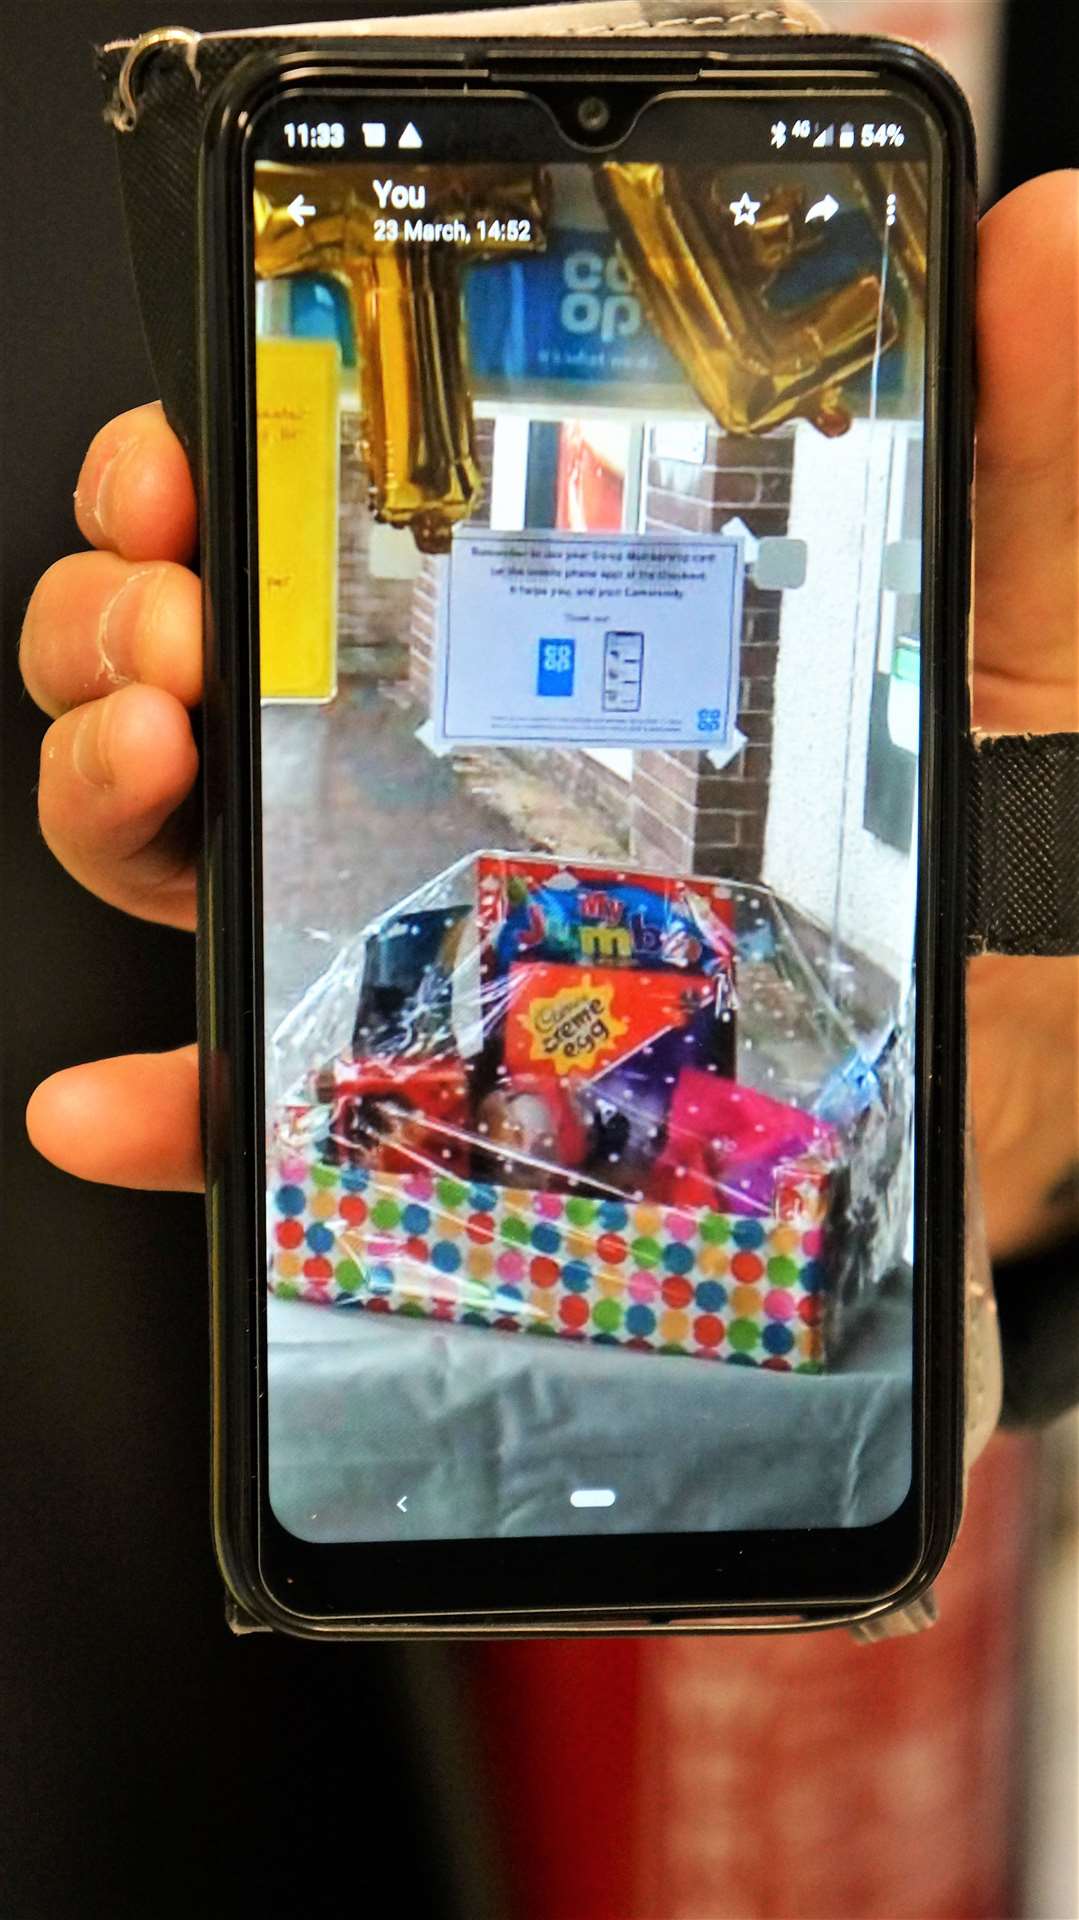 Kirsteen shows on her smartphone what the stolen hamper looked like while on display.